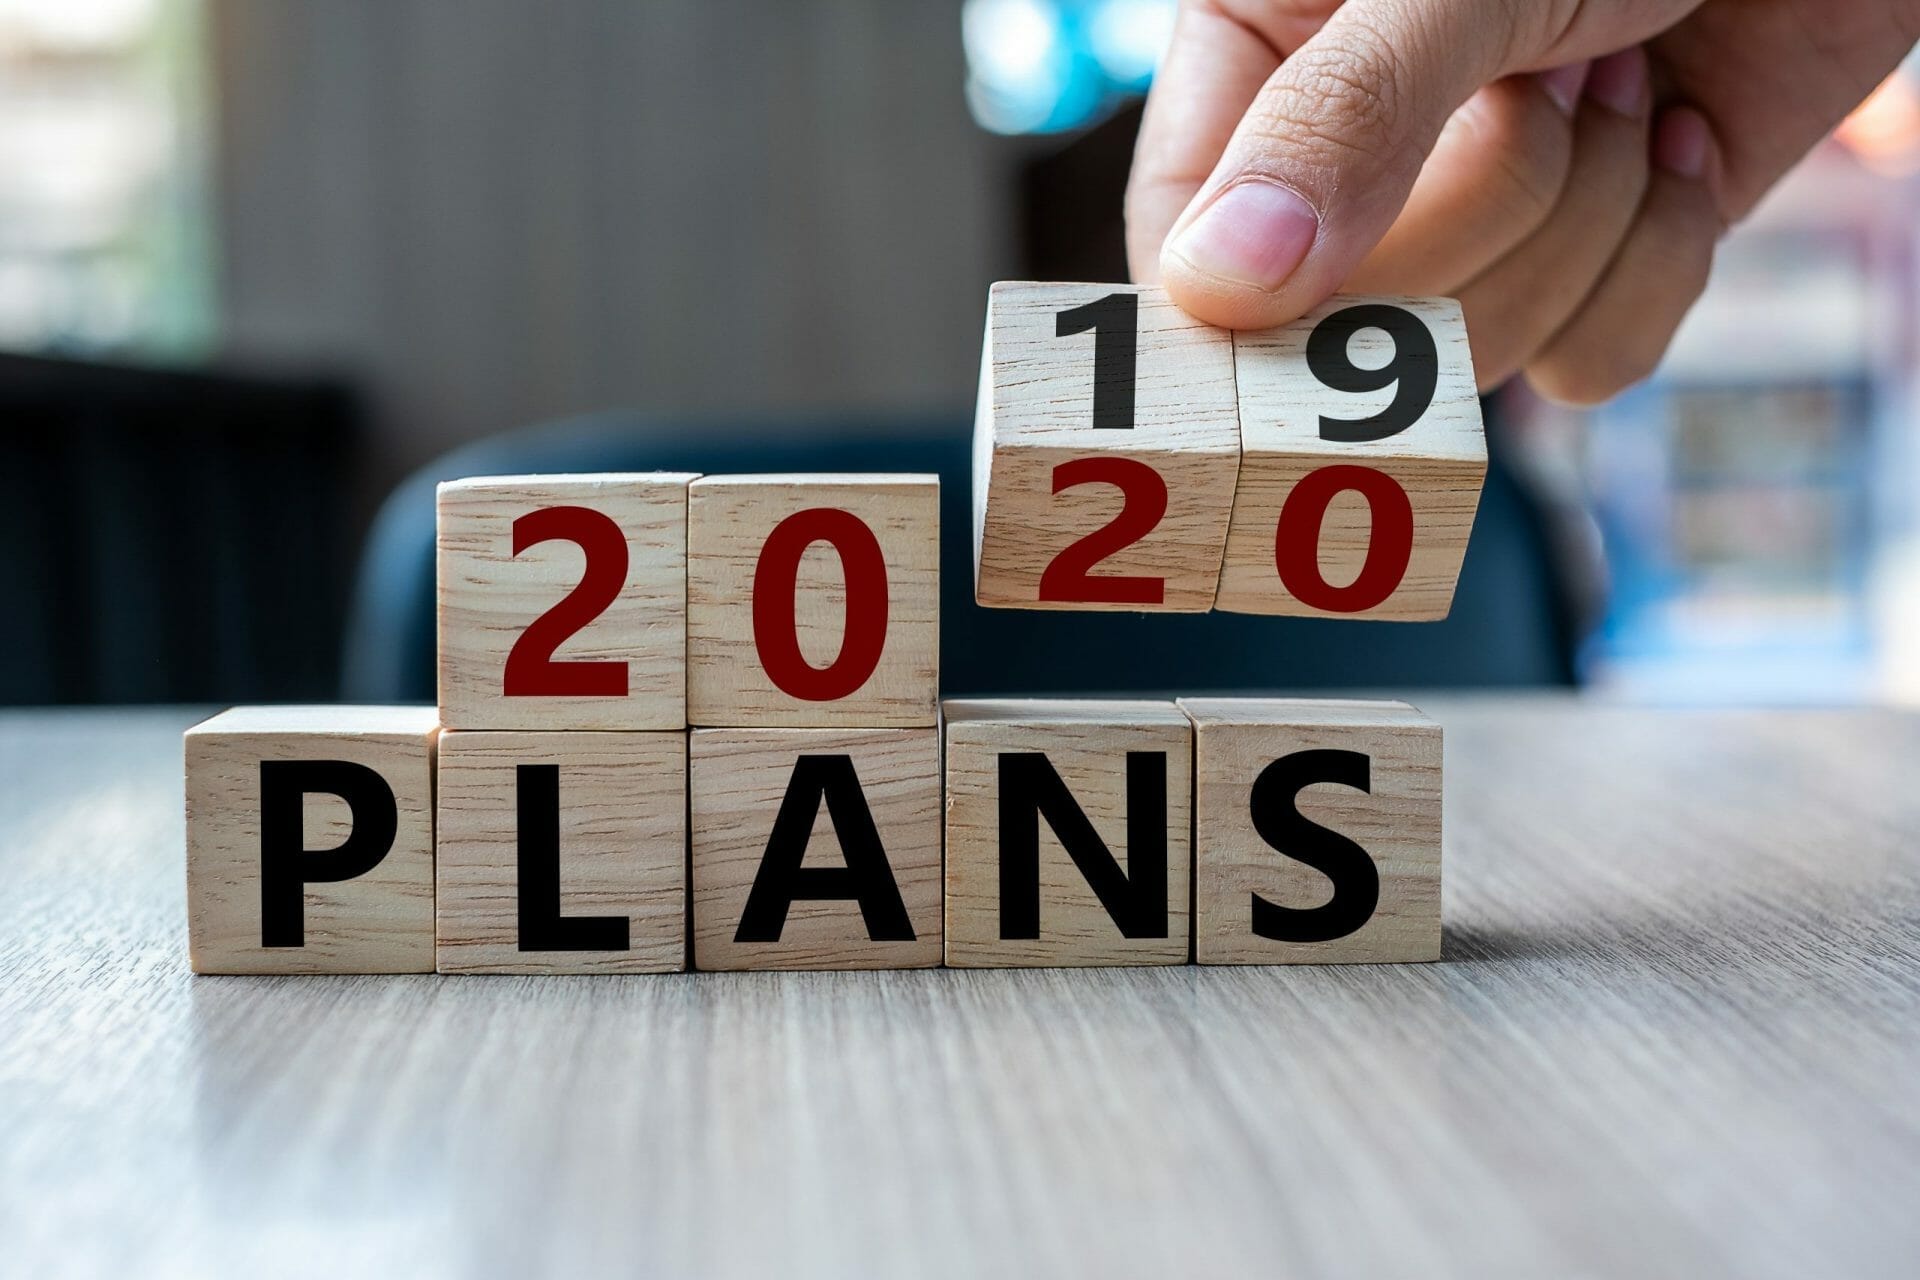 2019 to 2020 plans